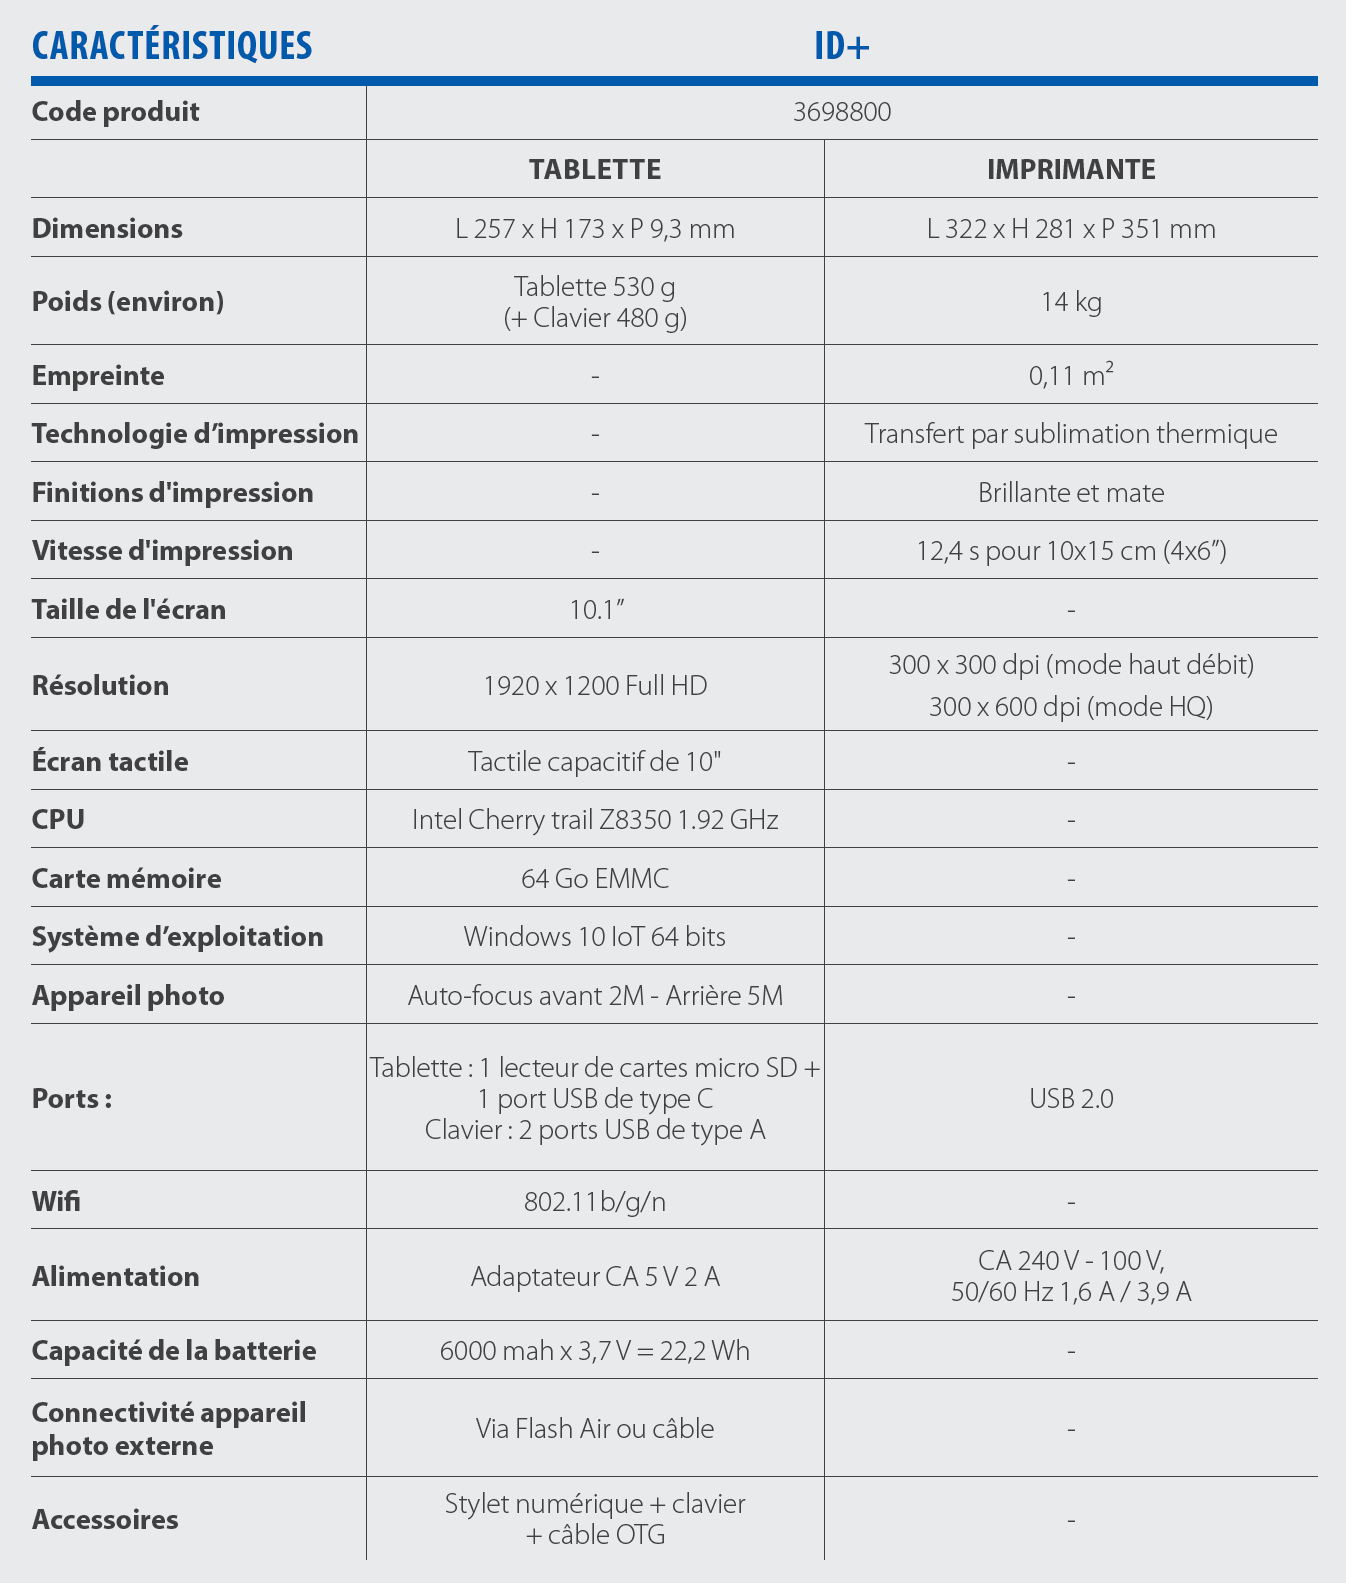 ID specifications FR